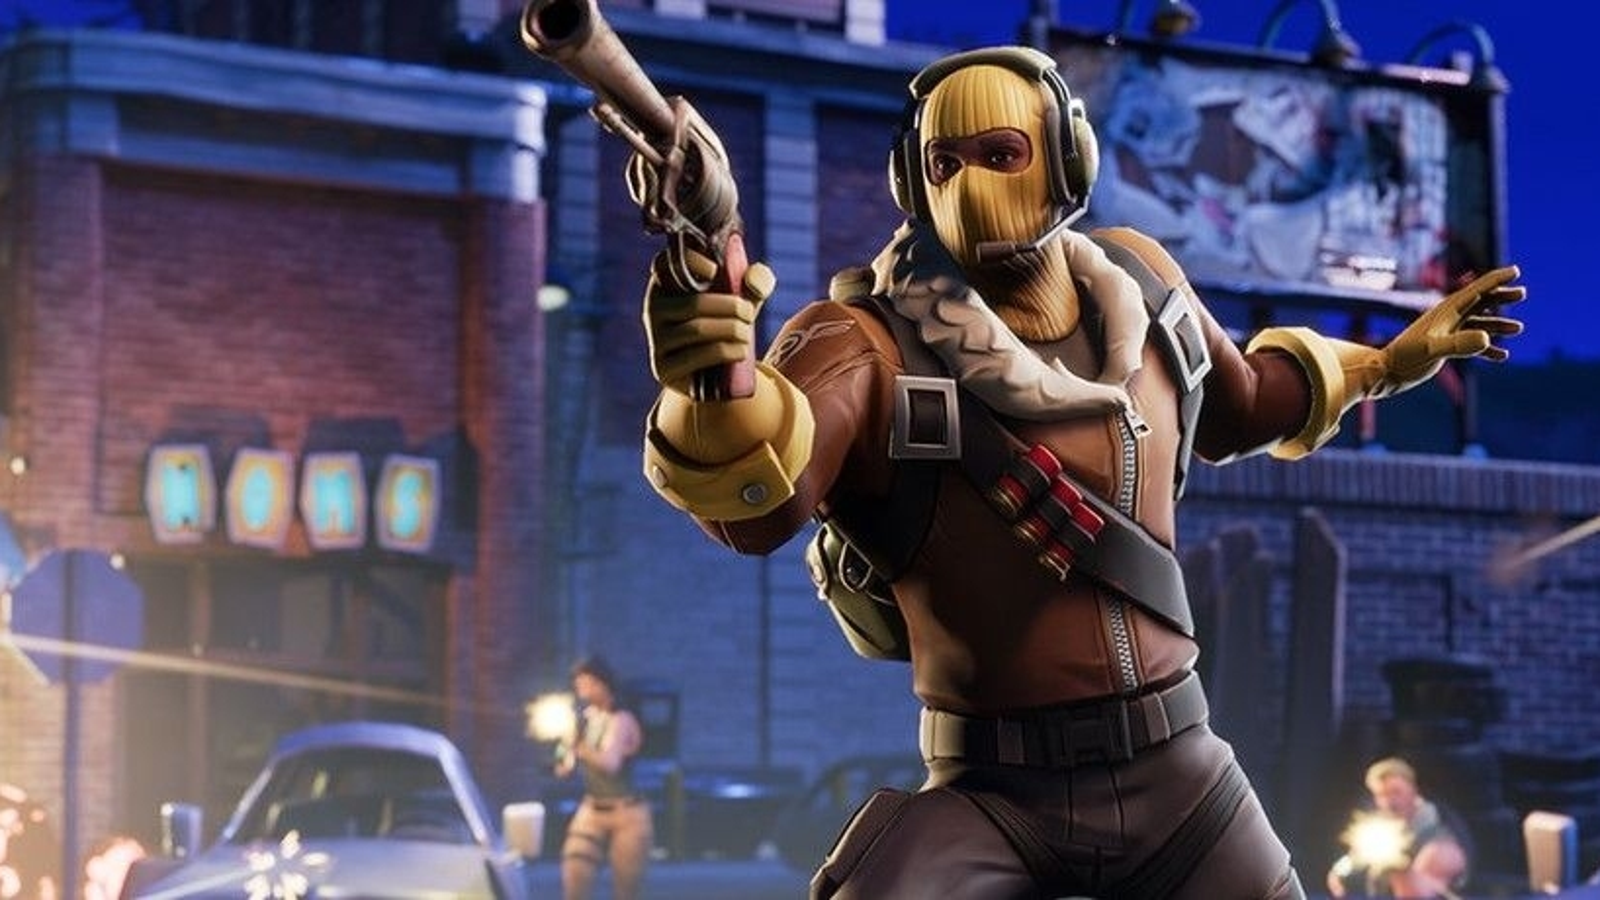 What's Really Going On With All Those Hacked Fortnite Accounts - 